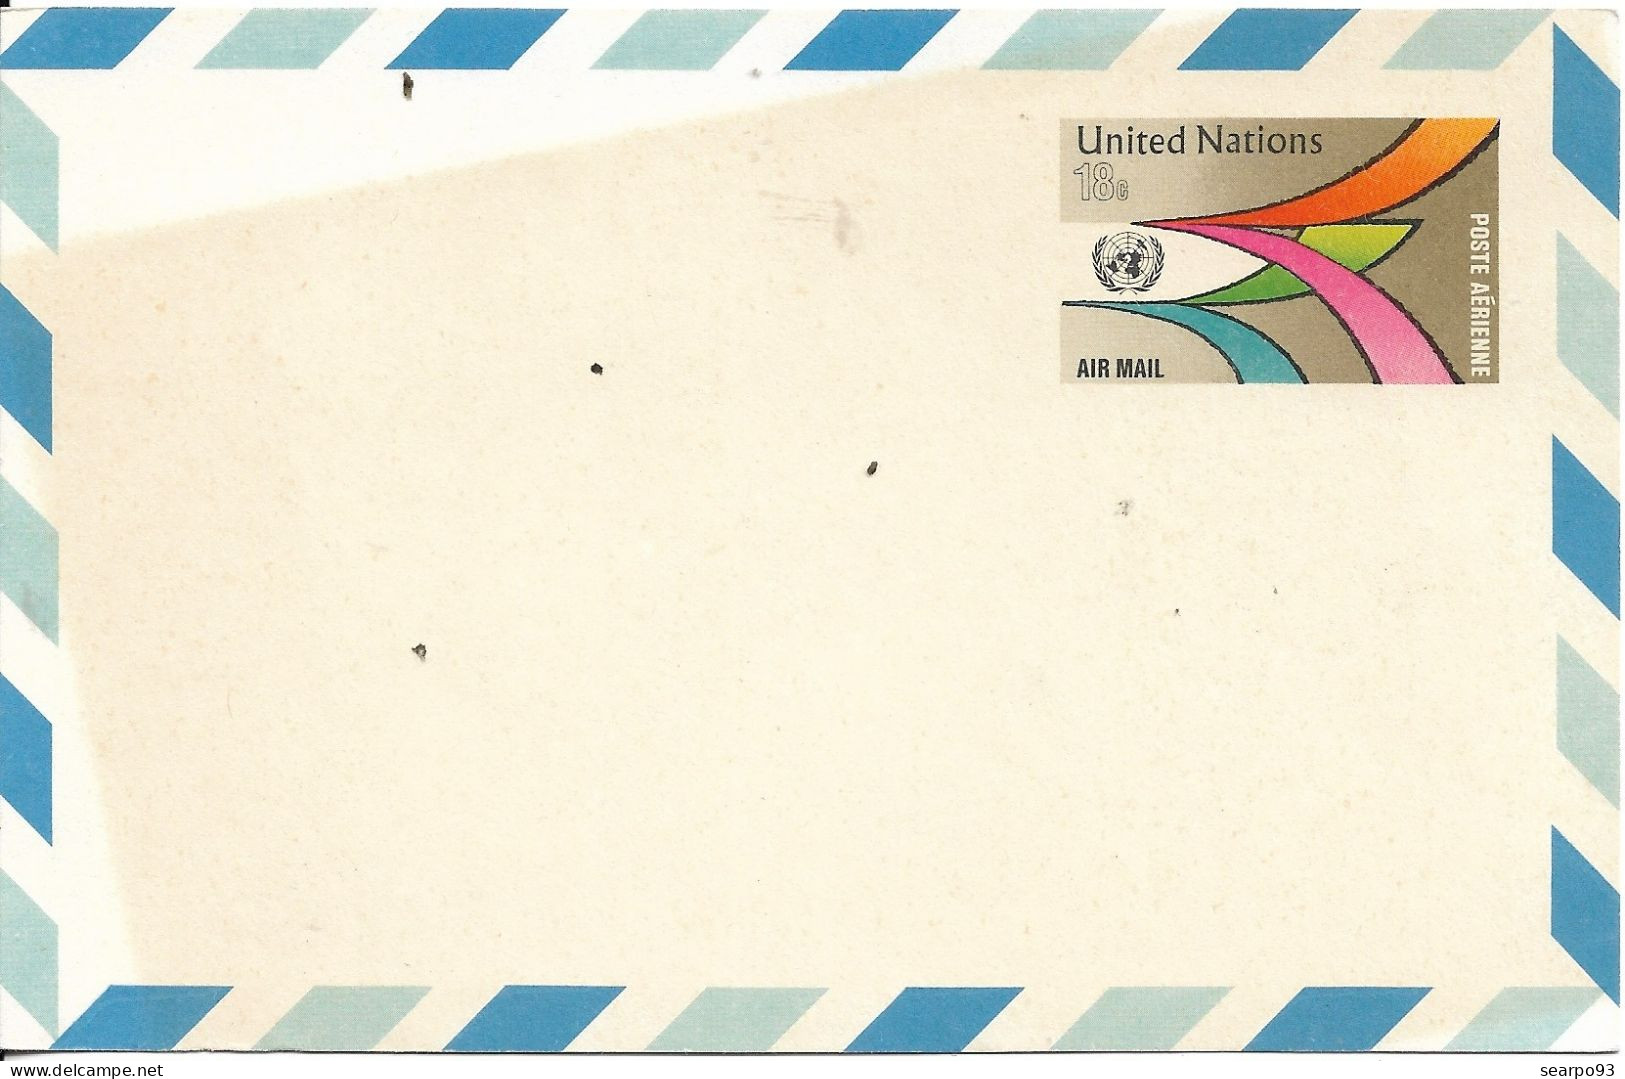 UNITED NATIONS. AIR LETTER. POSTAL STATIONERY - Luftpost